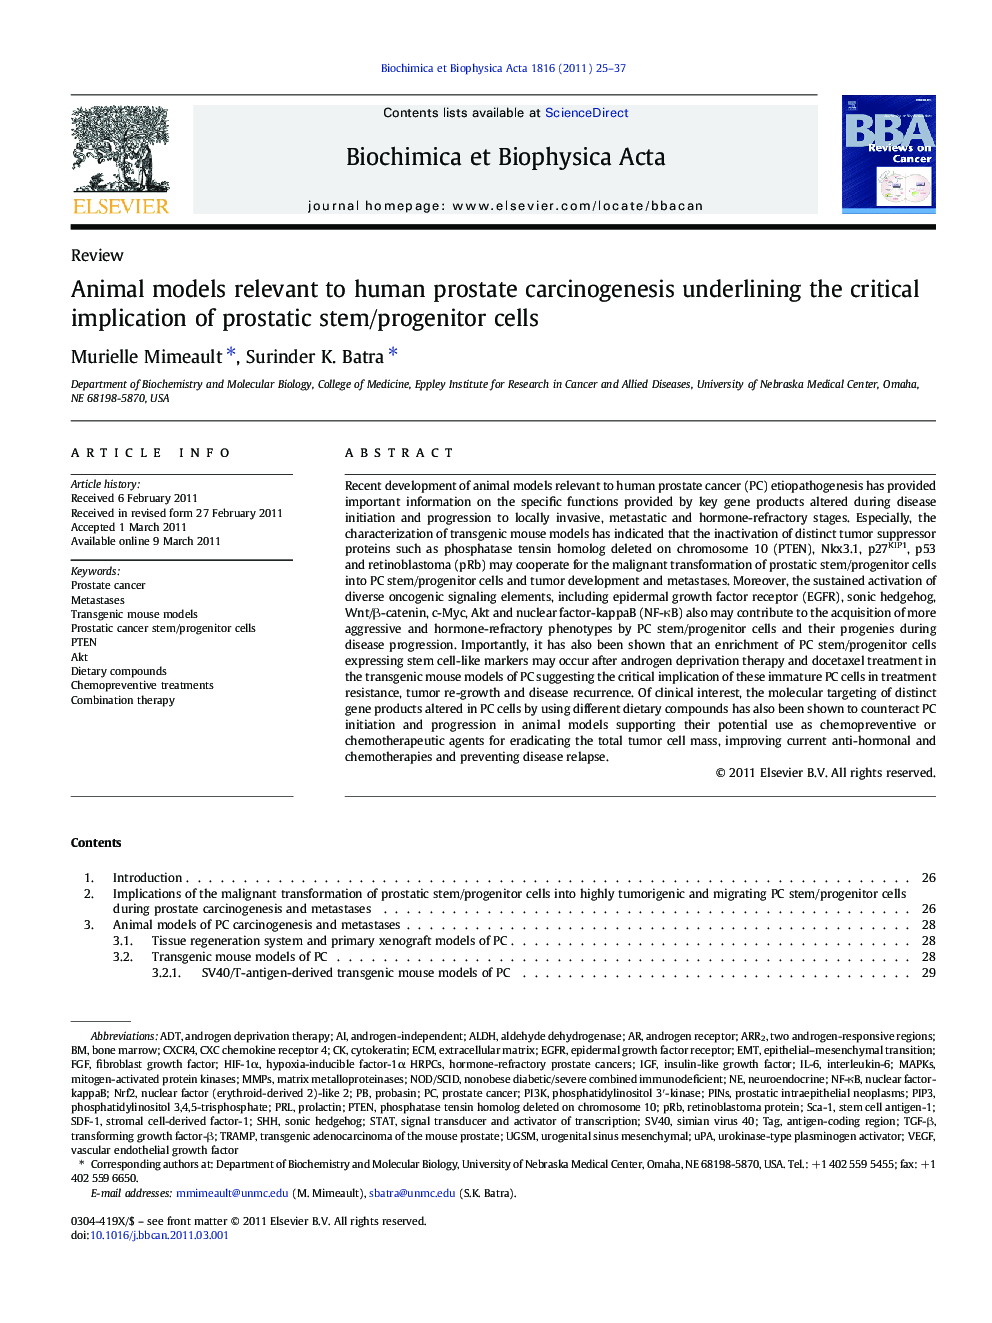 Animal models relevant to human prostate carcinogenesis underlining the critical implication of prostatic stem/progenitor cells